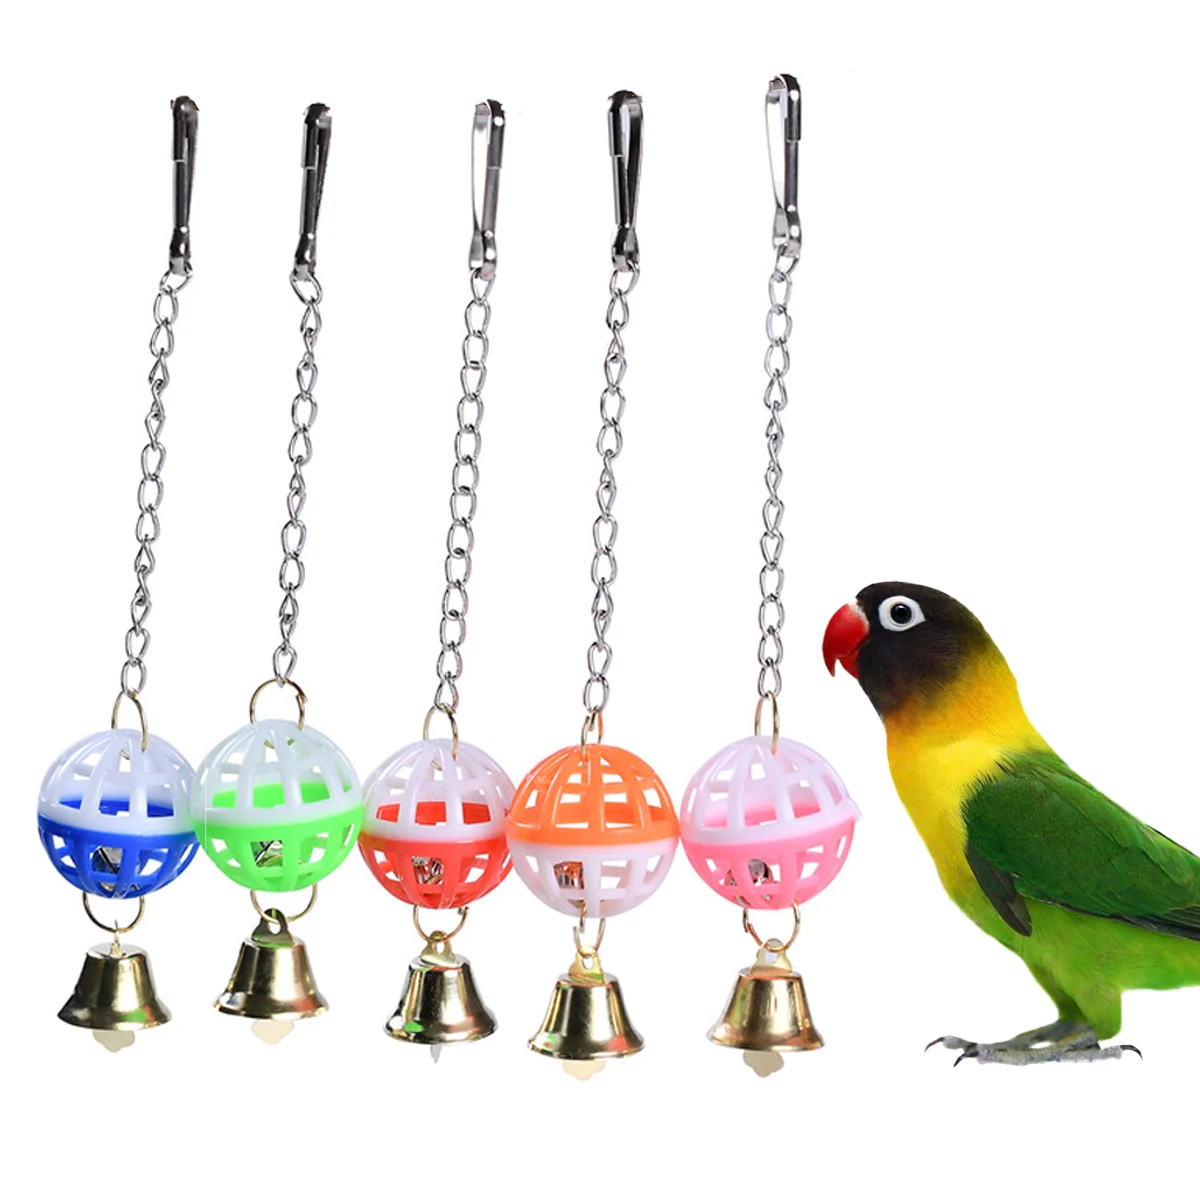 Bird-Parrot-Toy-Colorful-Bird-Swing-Toys-with-Bell-Hanging-Toy-For-Budgie-Lovebirds-Conures-Small.jpg